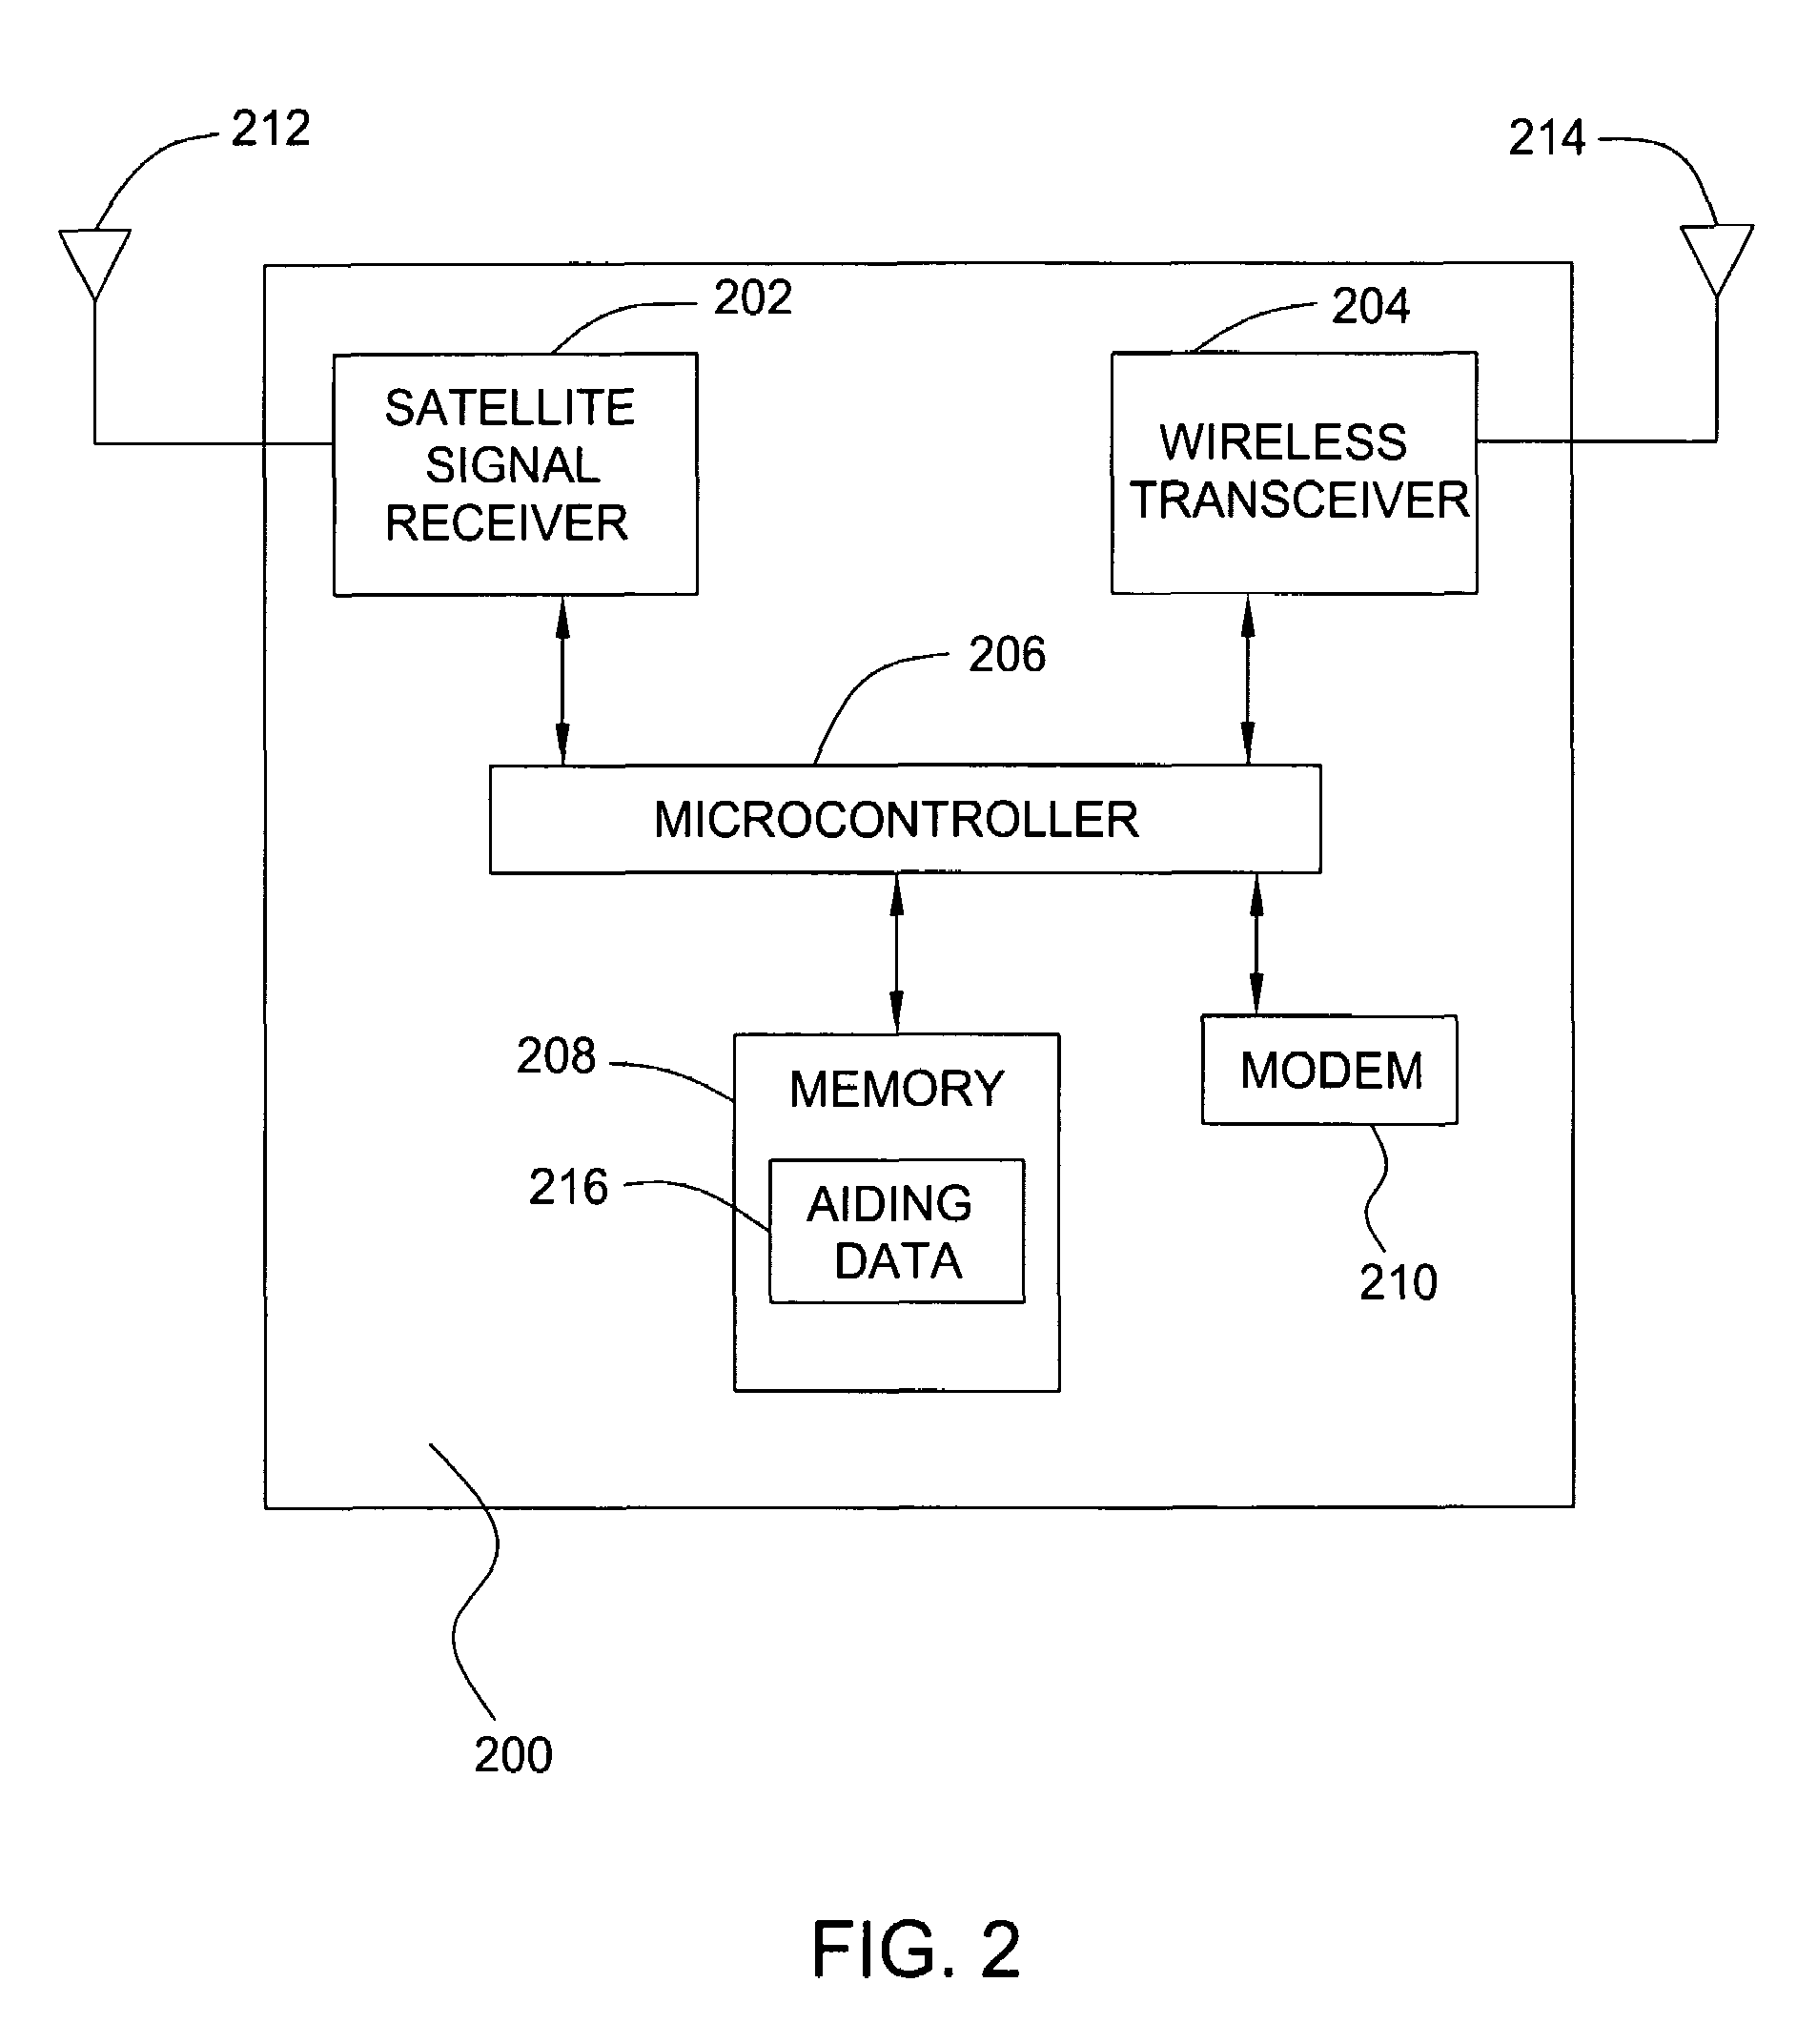 Method and apparatus for monitoring the integrity of satellite tracking data used by a remote receiver